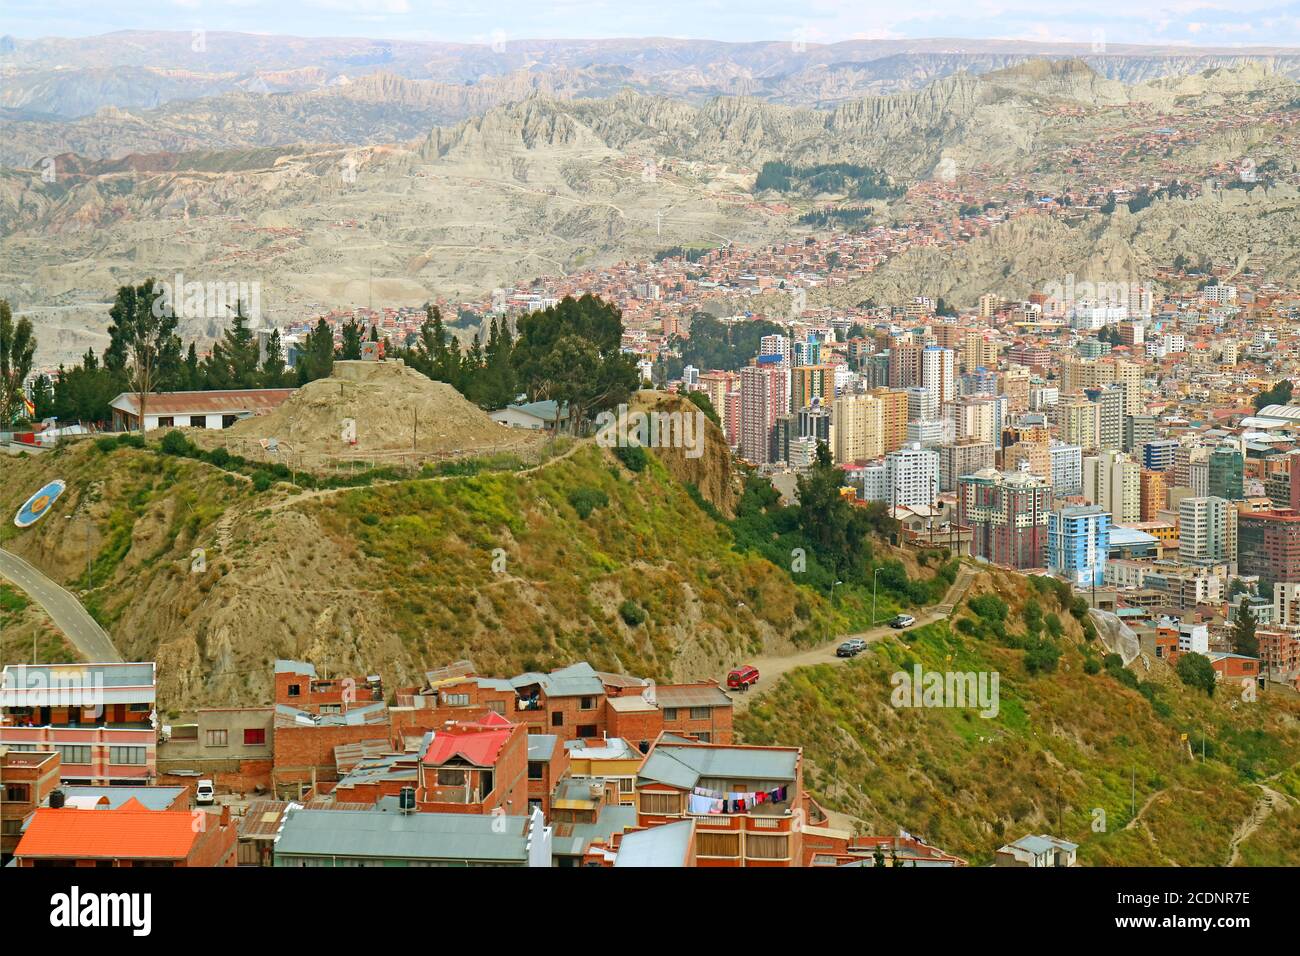 La Paz of Bolivia, the world's highest capital city at the elevation of  3,640 metres above sea level, South America Stock Photo - Alamy